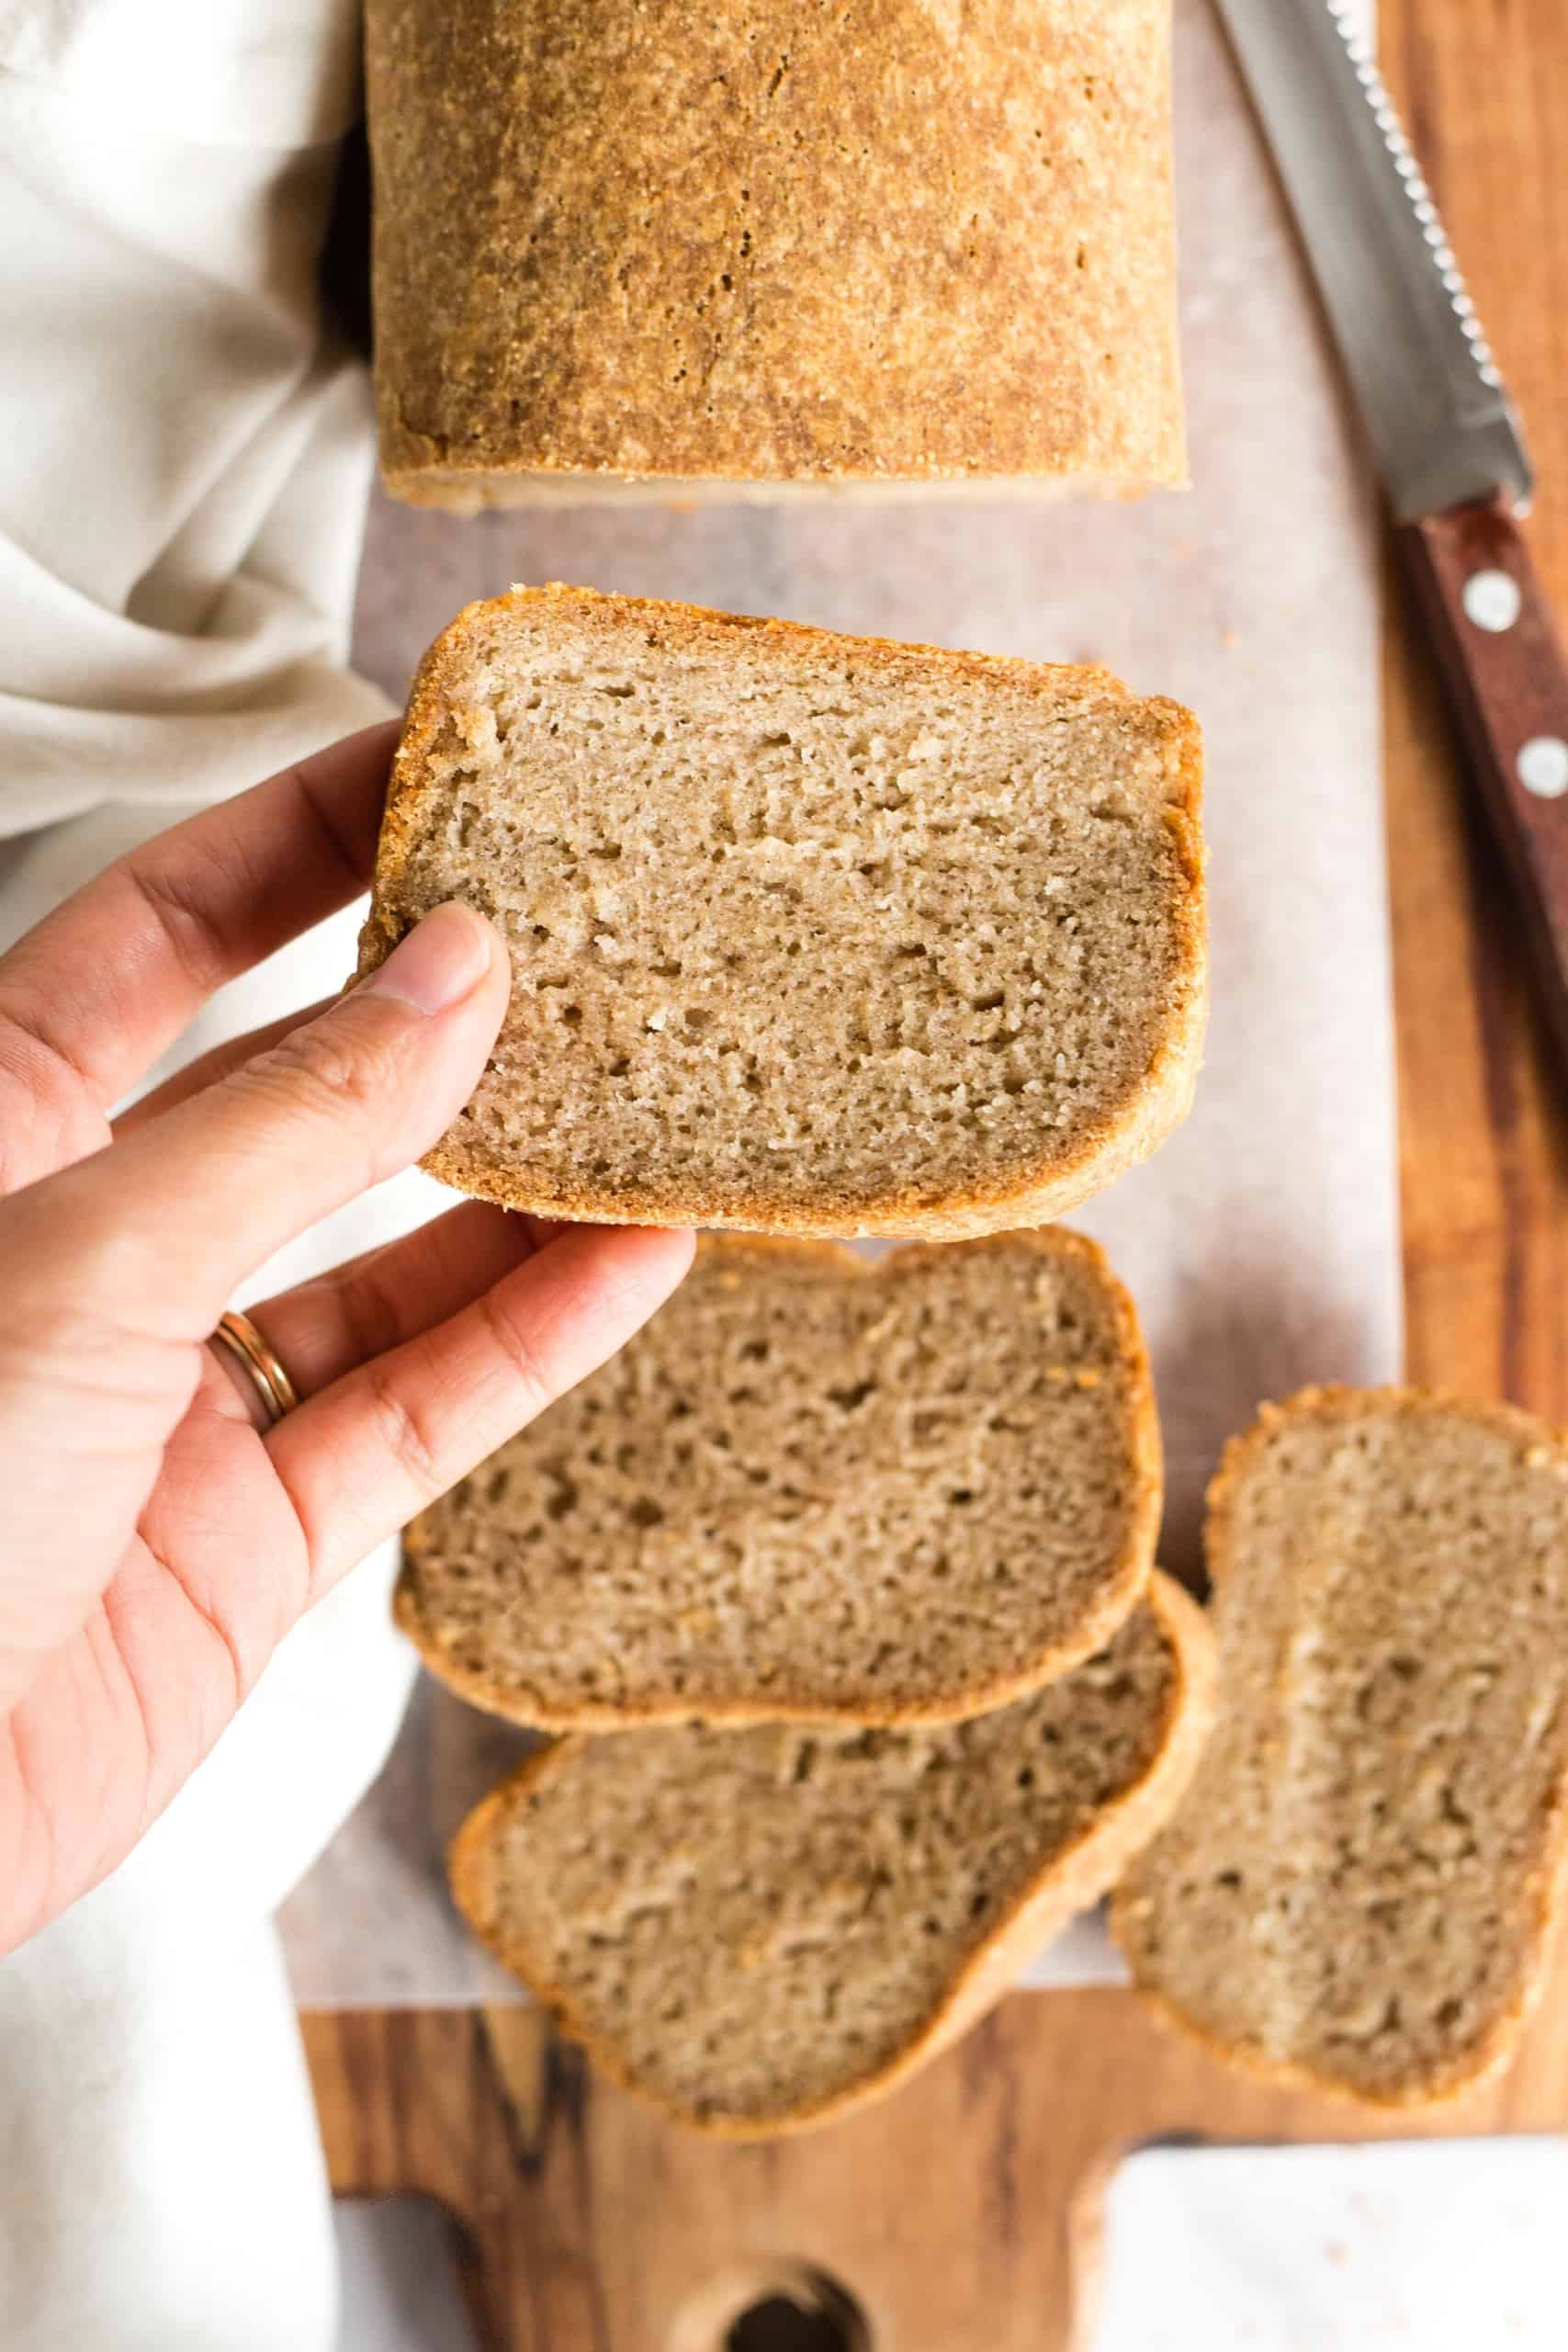 Holding up a slice of gluten-free wholegrain bread.